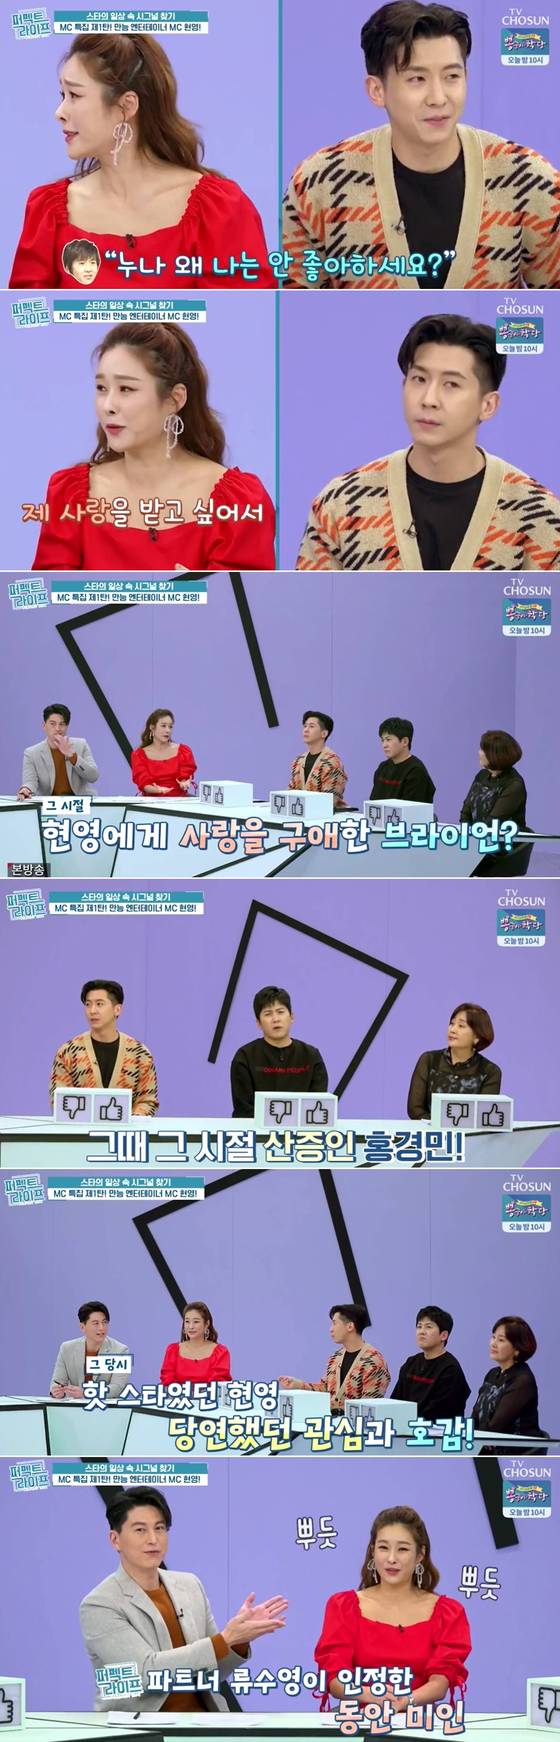 Hyun-young “Brian always seems thirsty for me…’Why don’t you like me?’